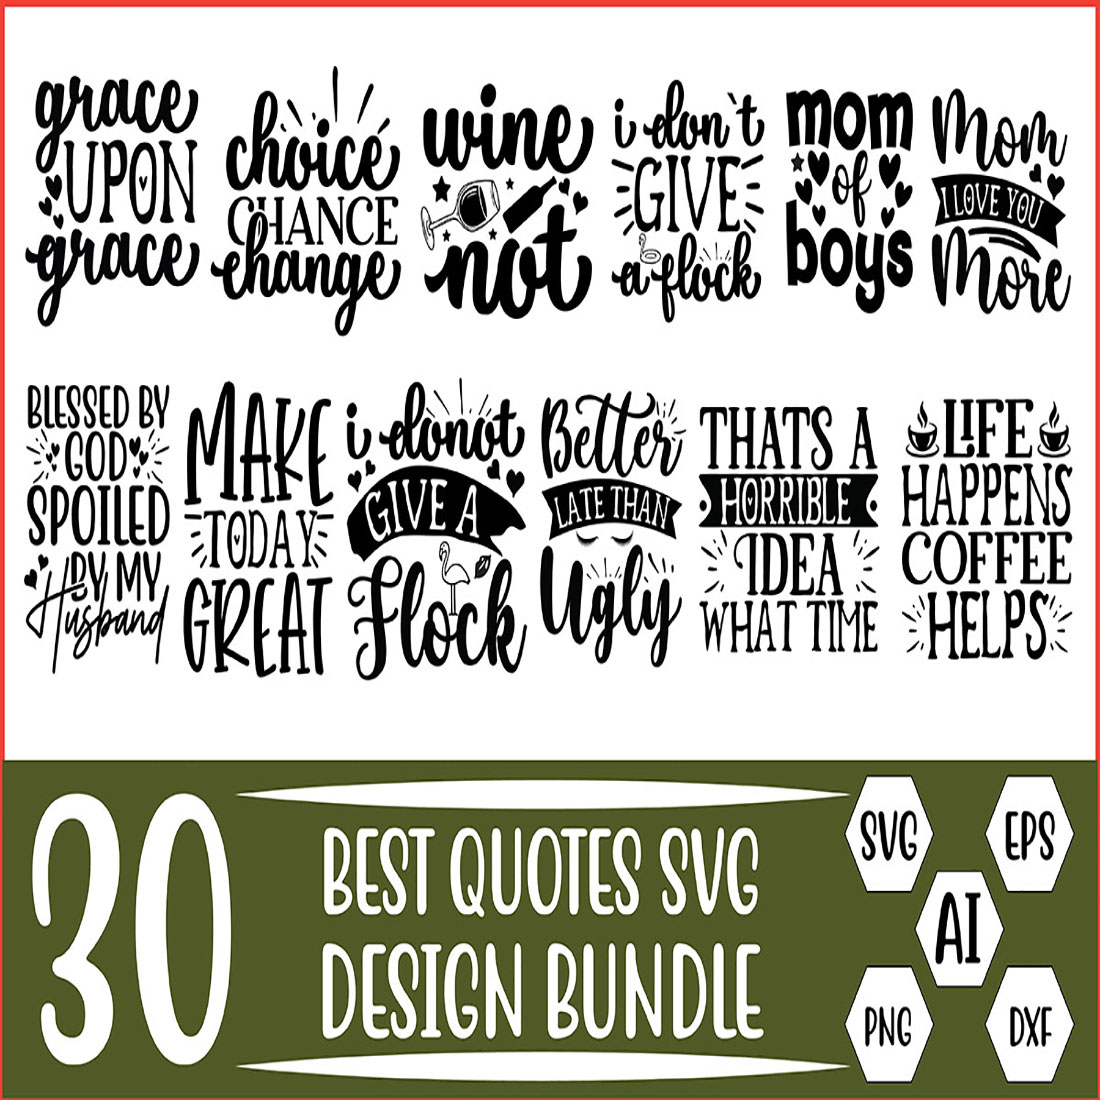 30 Best Quotes Svg Design Bundle Vector Template cover image.